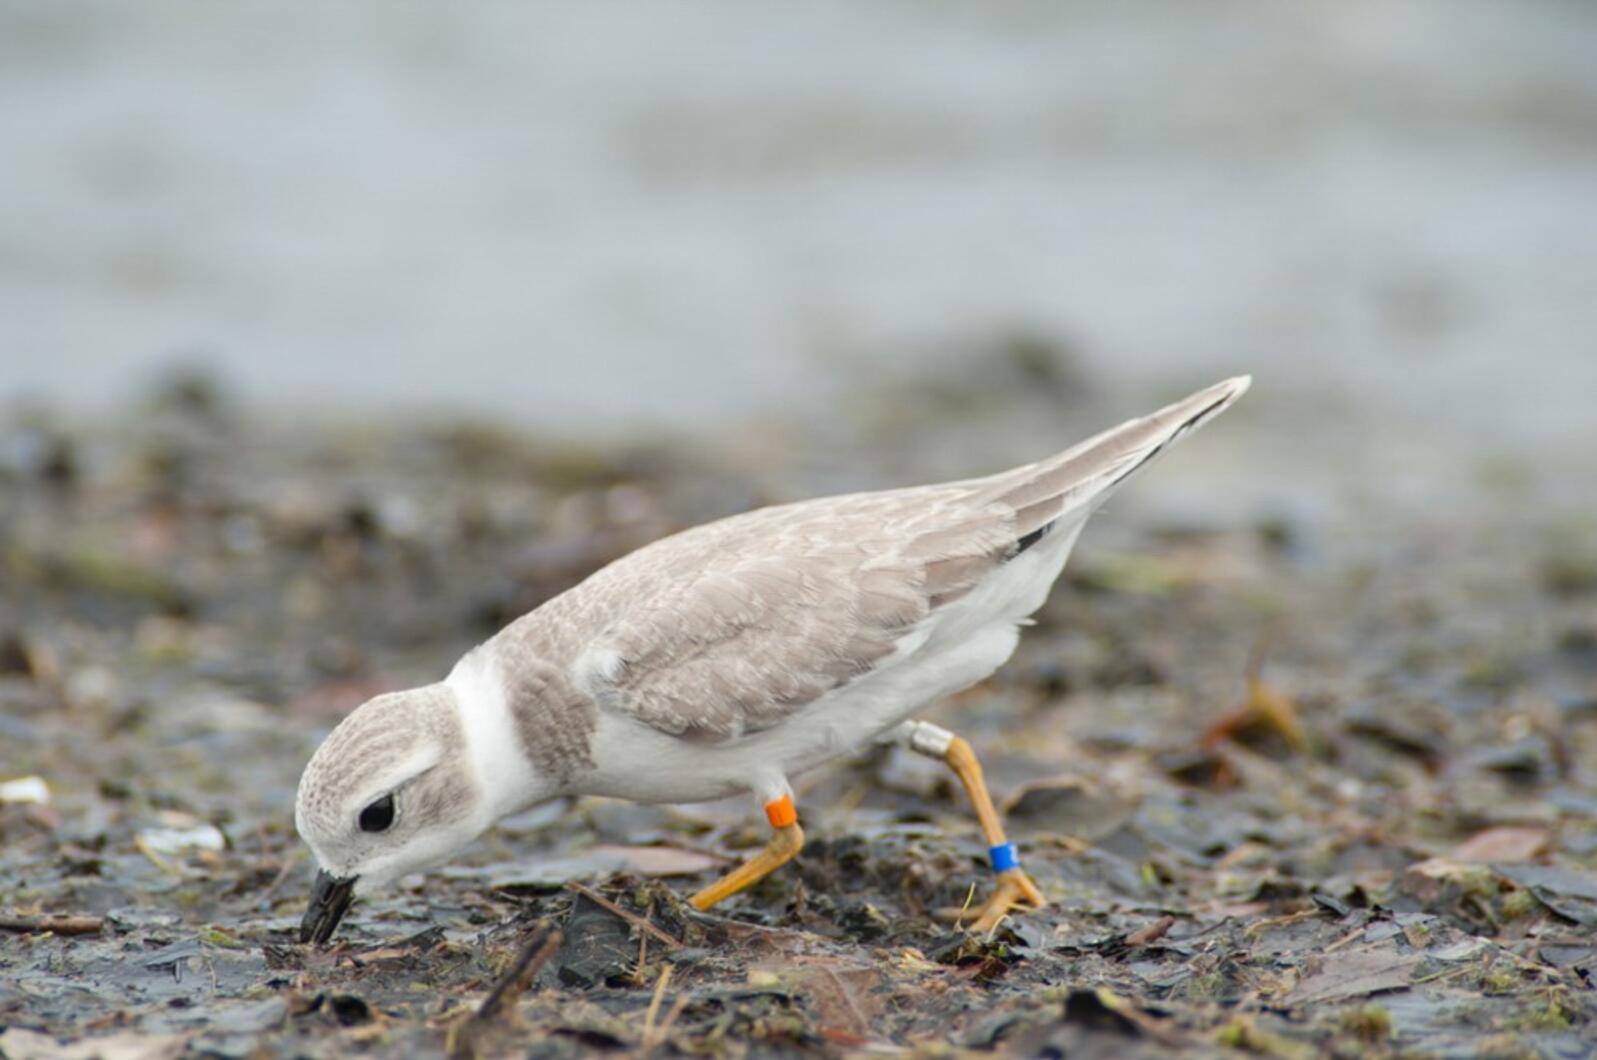 Great Lakes Piping Plover. Photo: Michael Greer